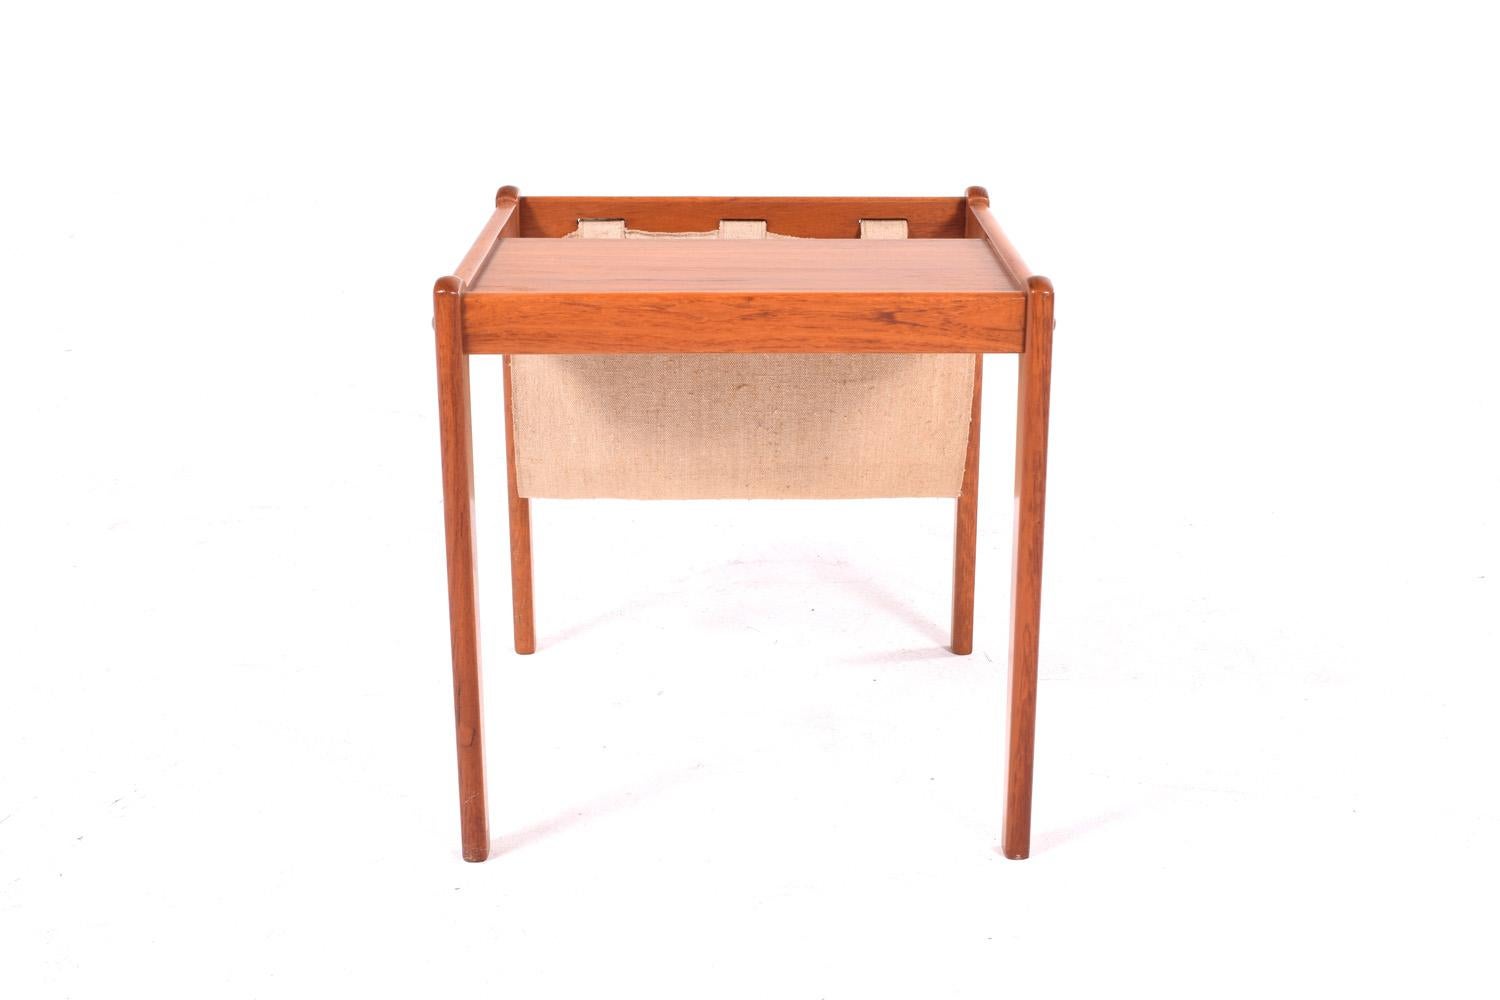 Danish teak side table with fabric magazine holder by Furbo. The item has been refinished and is in very good condition.